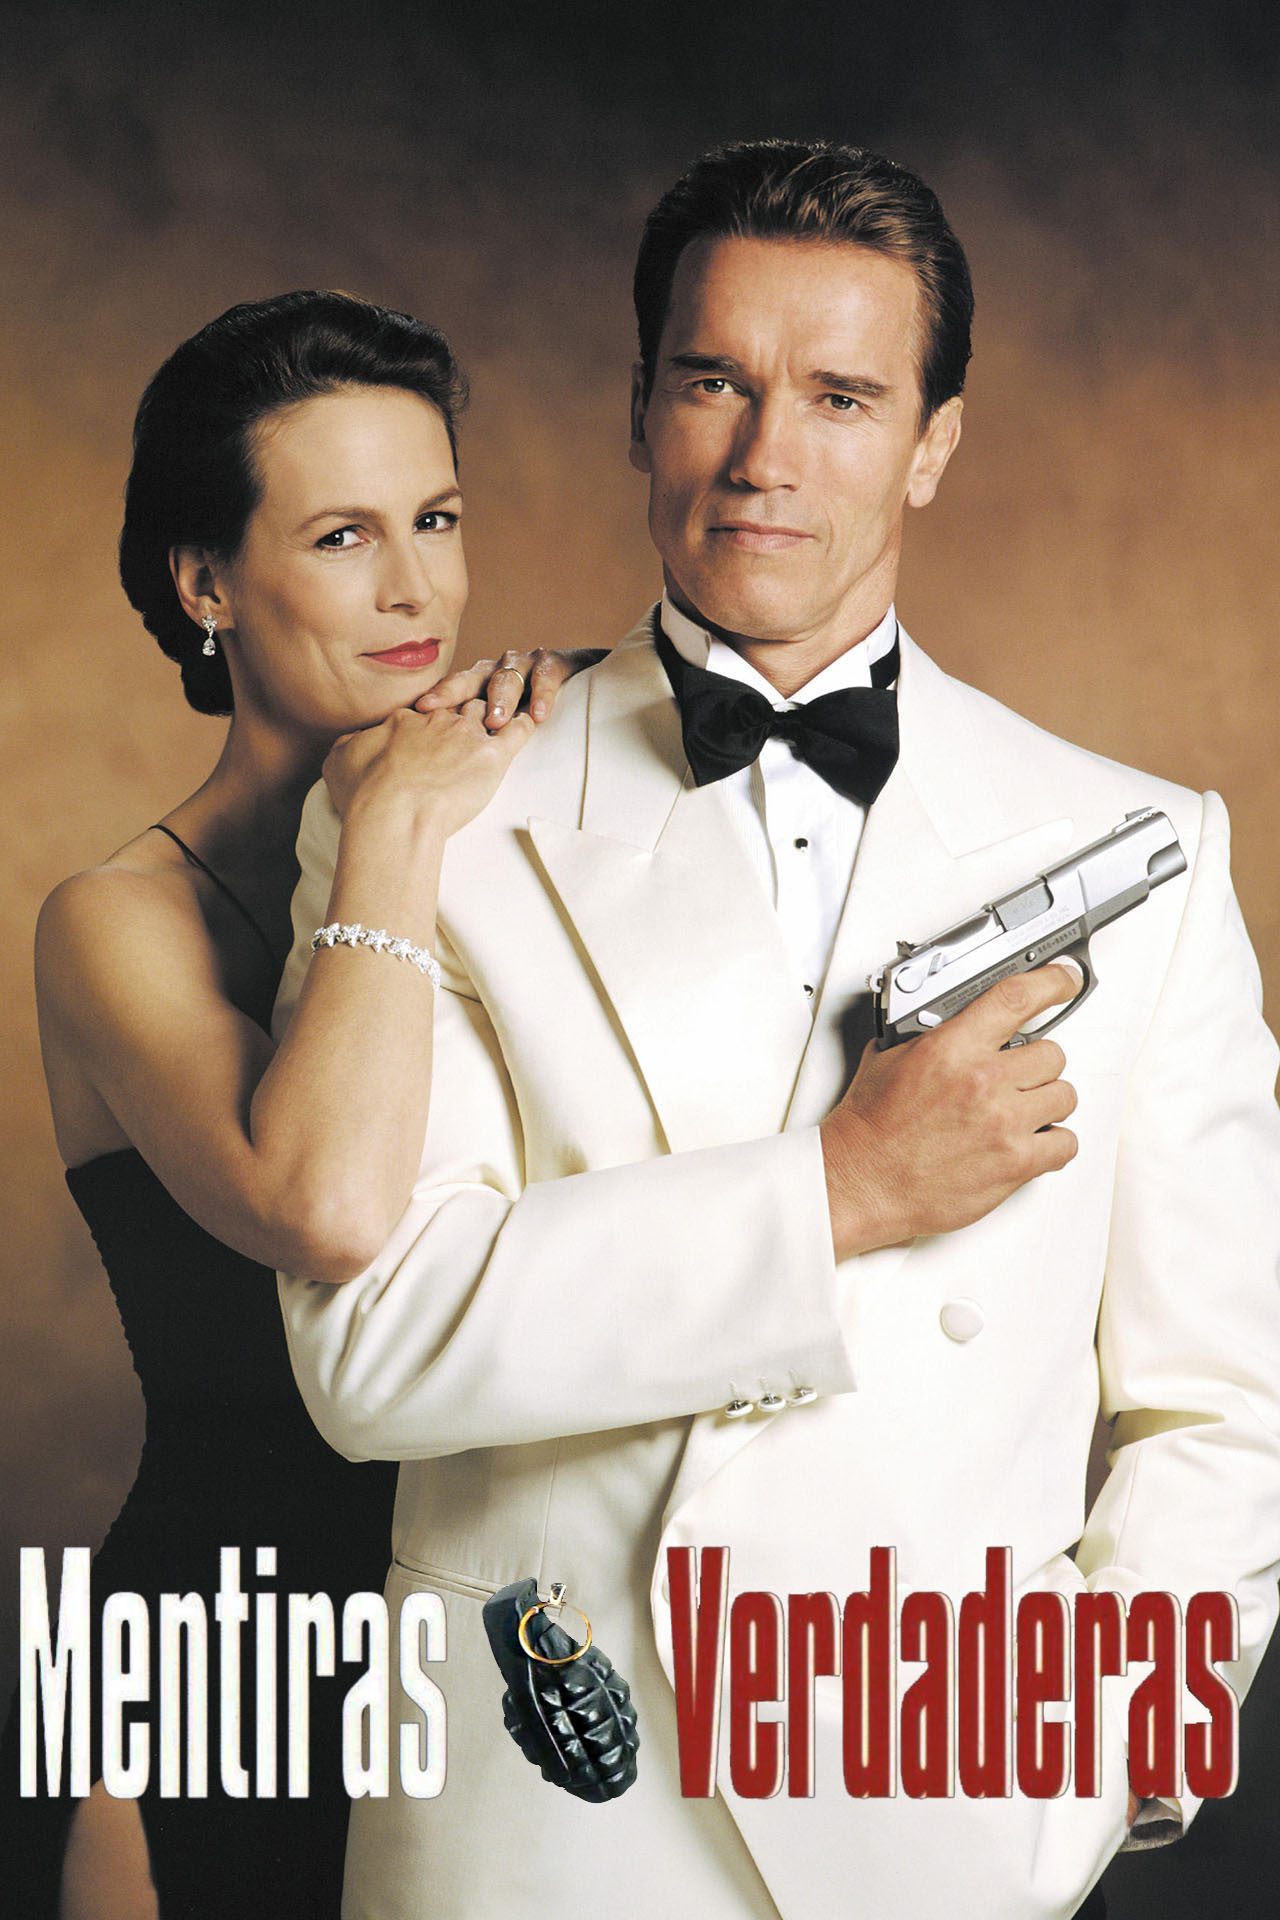 True Lies streaming, Where to watch, TV show guide, Action movie recommendations, 1280x1920 HD Handy